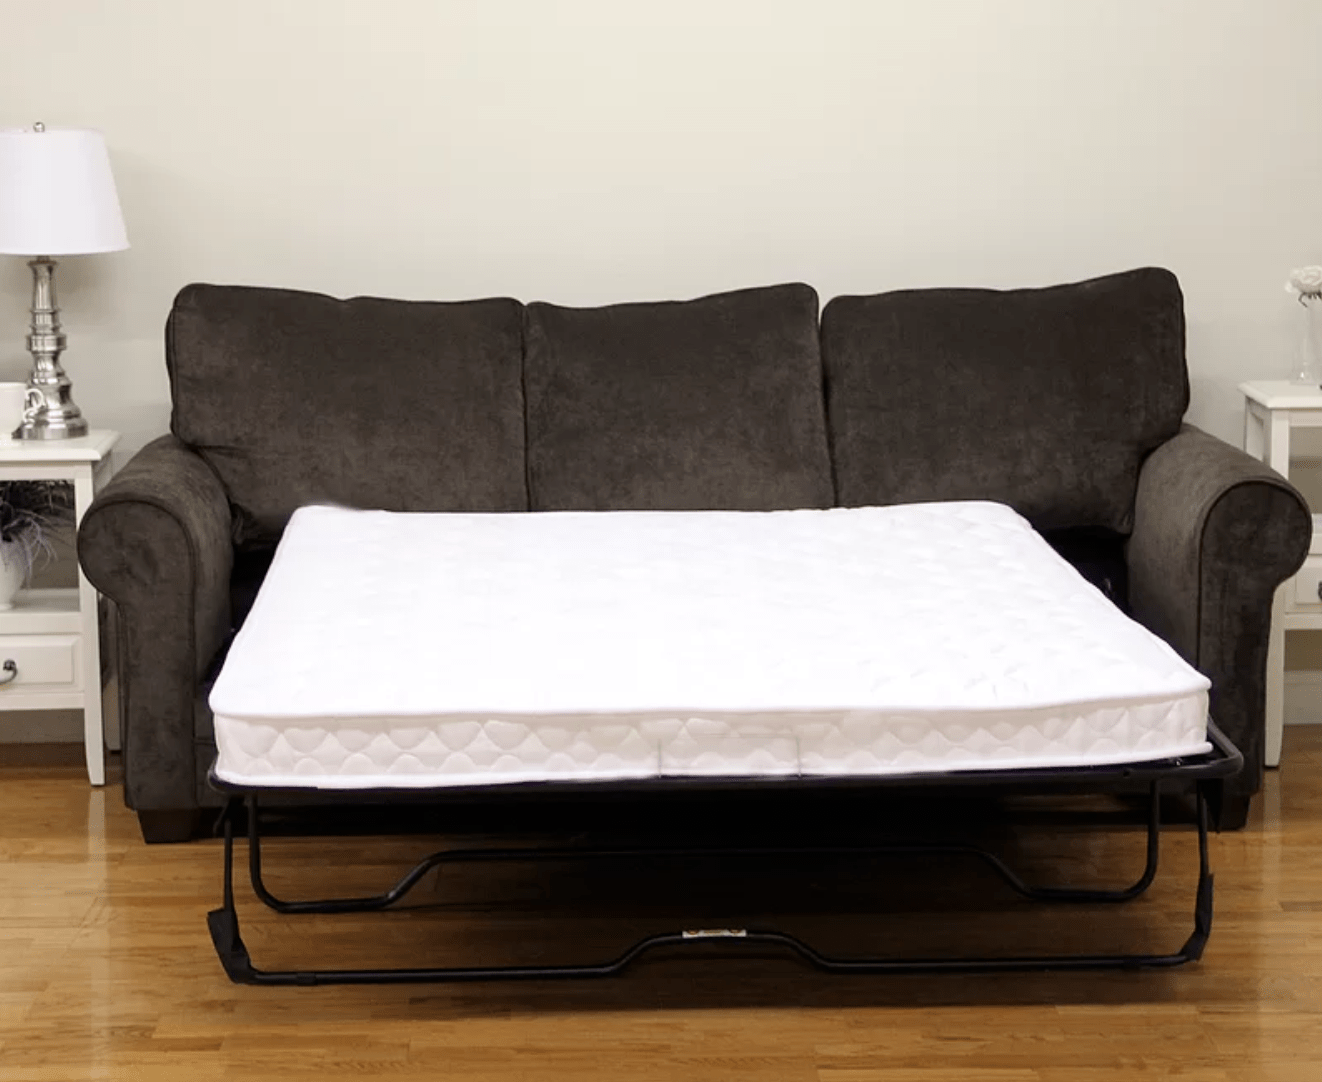 4ft 6in sofa bed